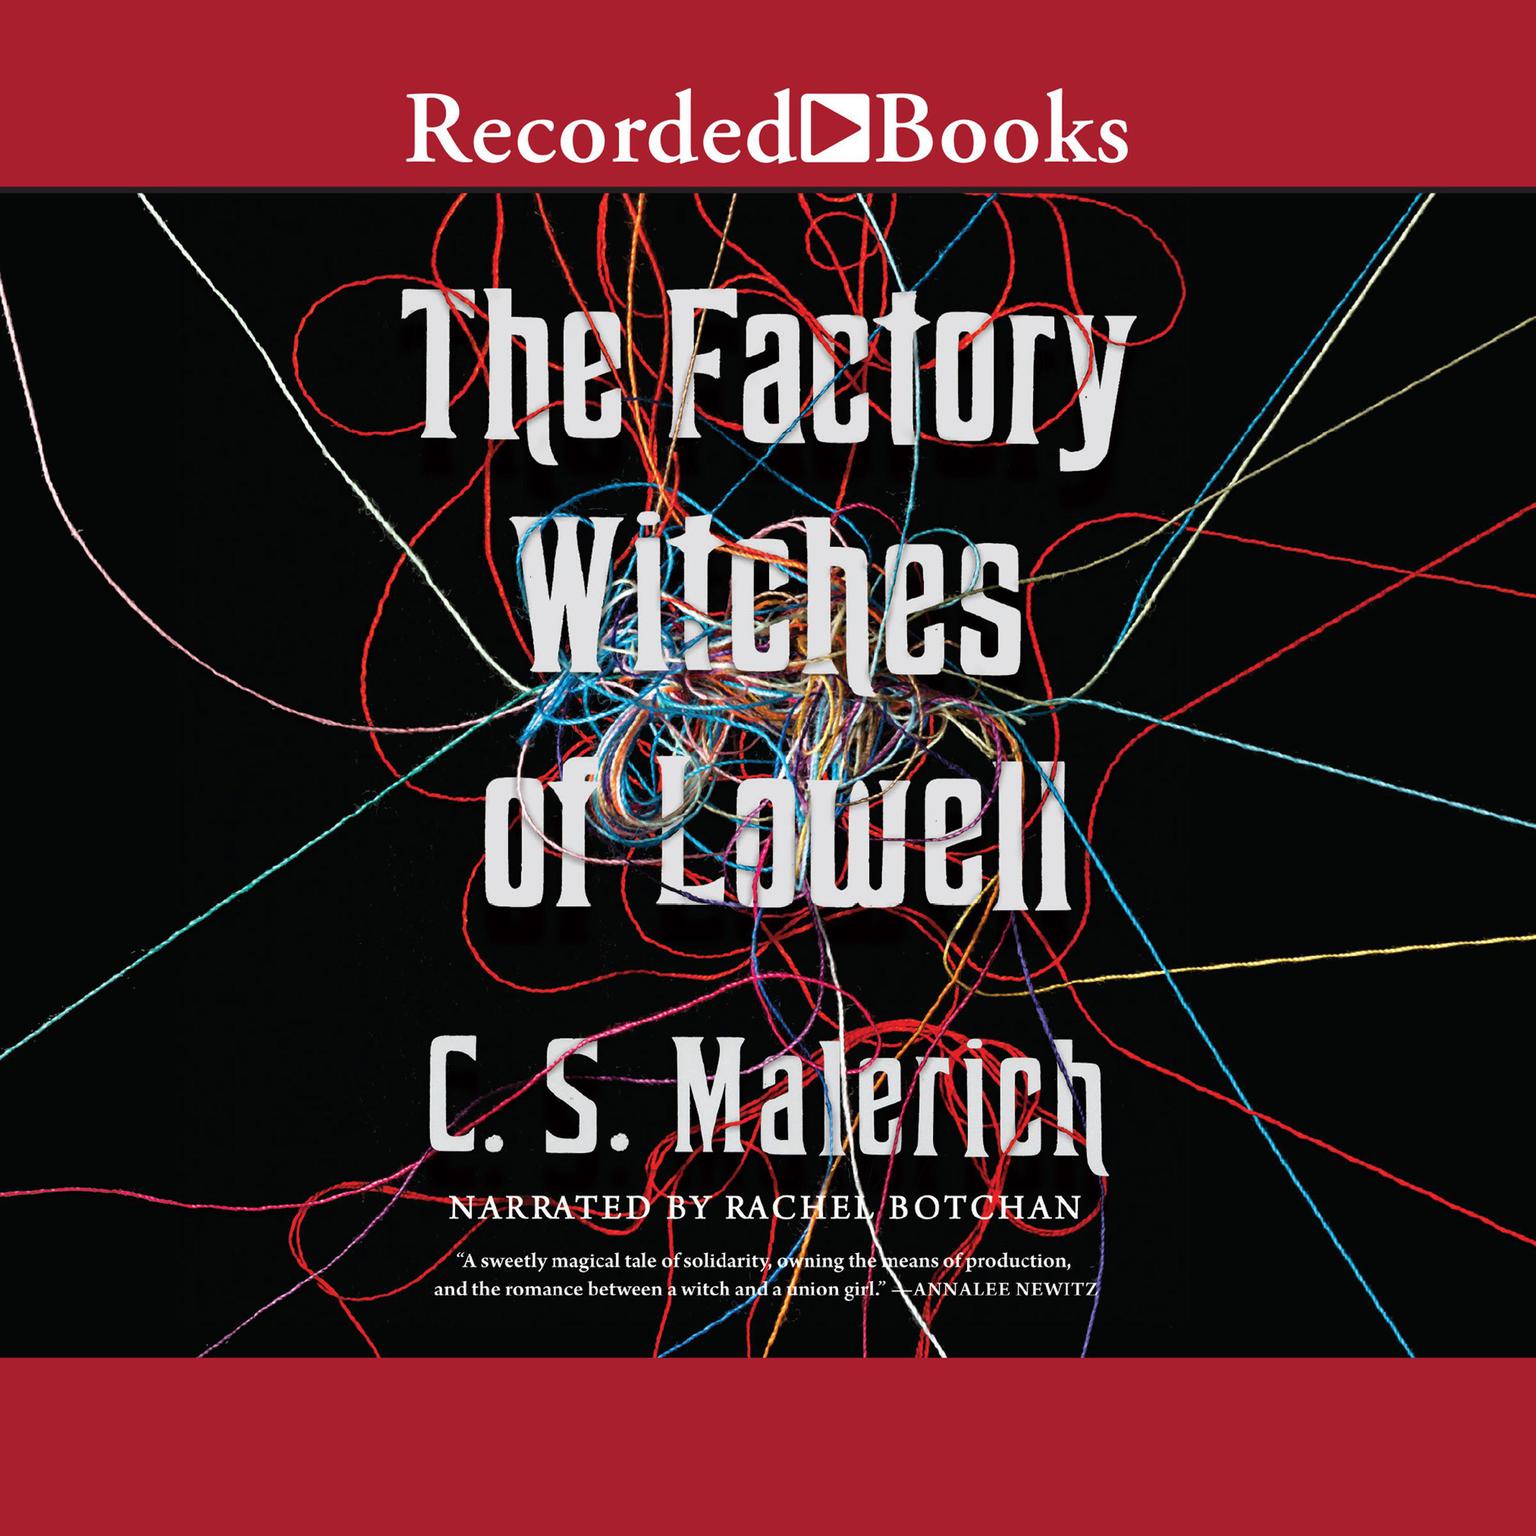 The Factory Witches of Lowell Audiobook, by C.S. Malerich